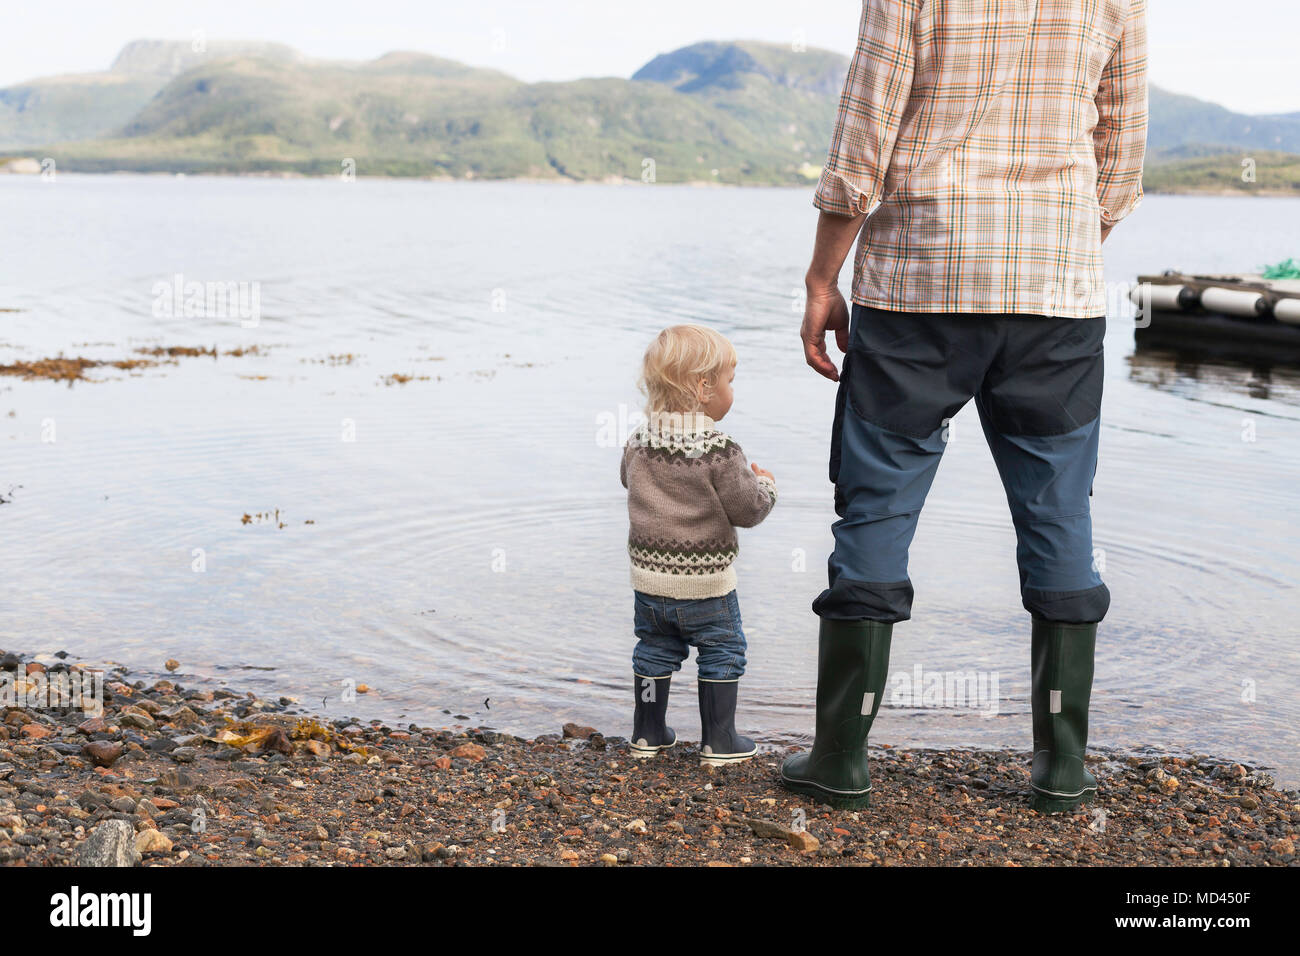 Toddler and father at fjord water's edge looking out, Aure, More og Romsdal, Norway Stock Photo